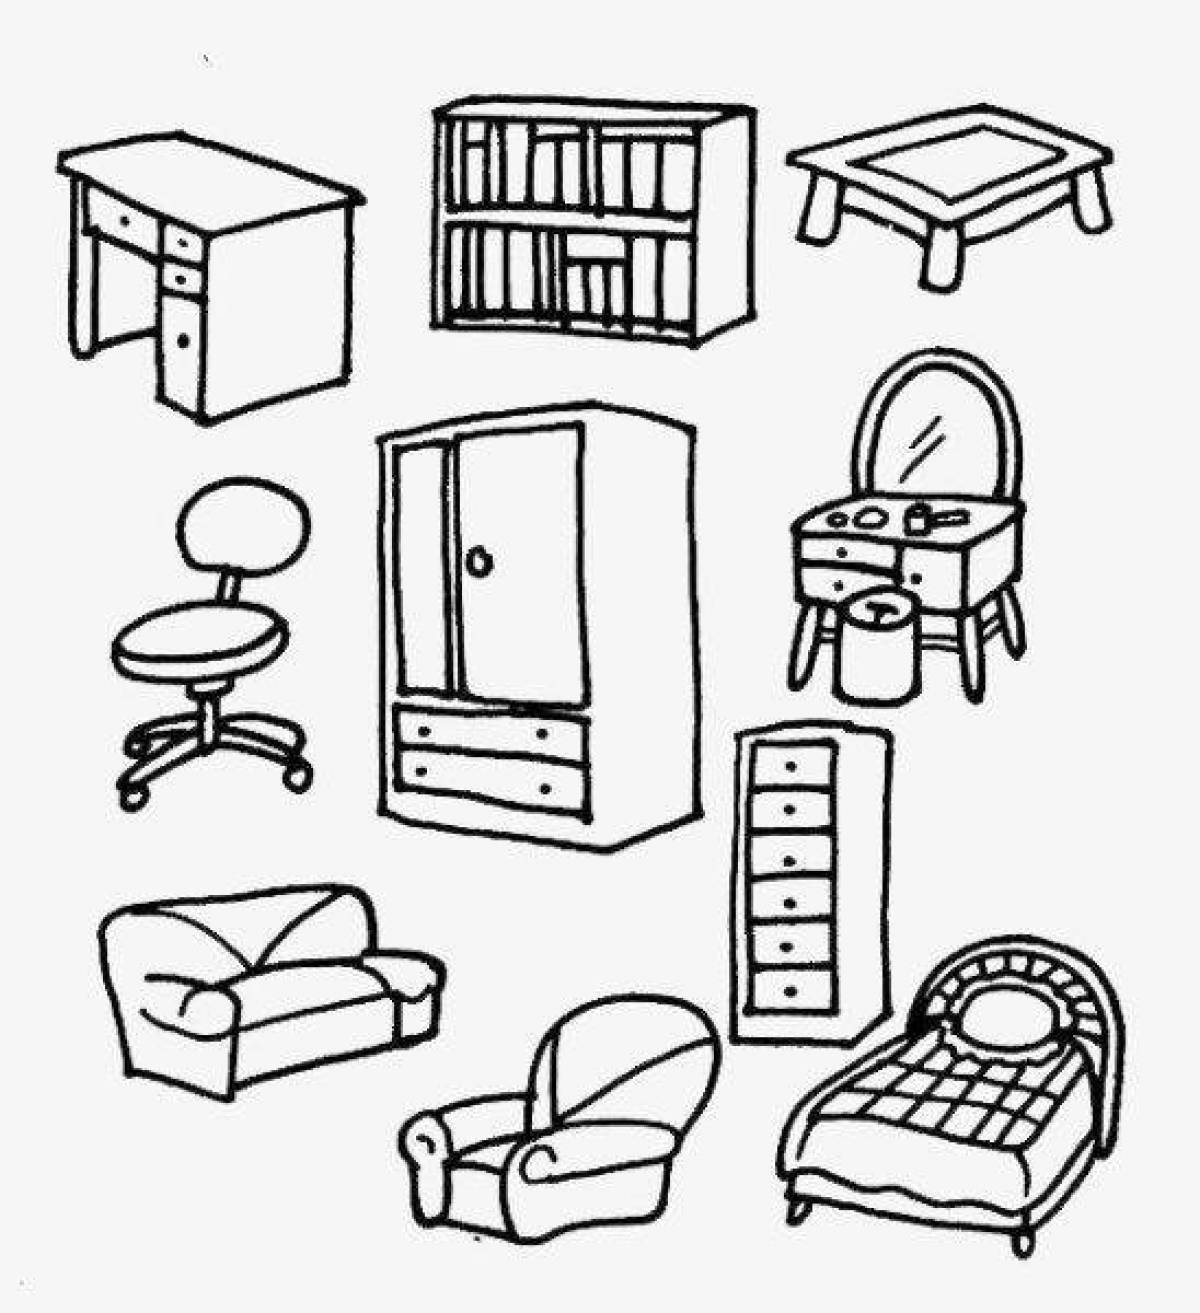 Fabulous furniture coloring page